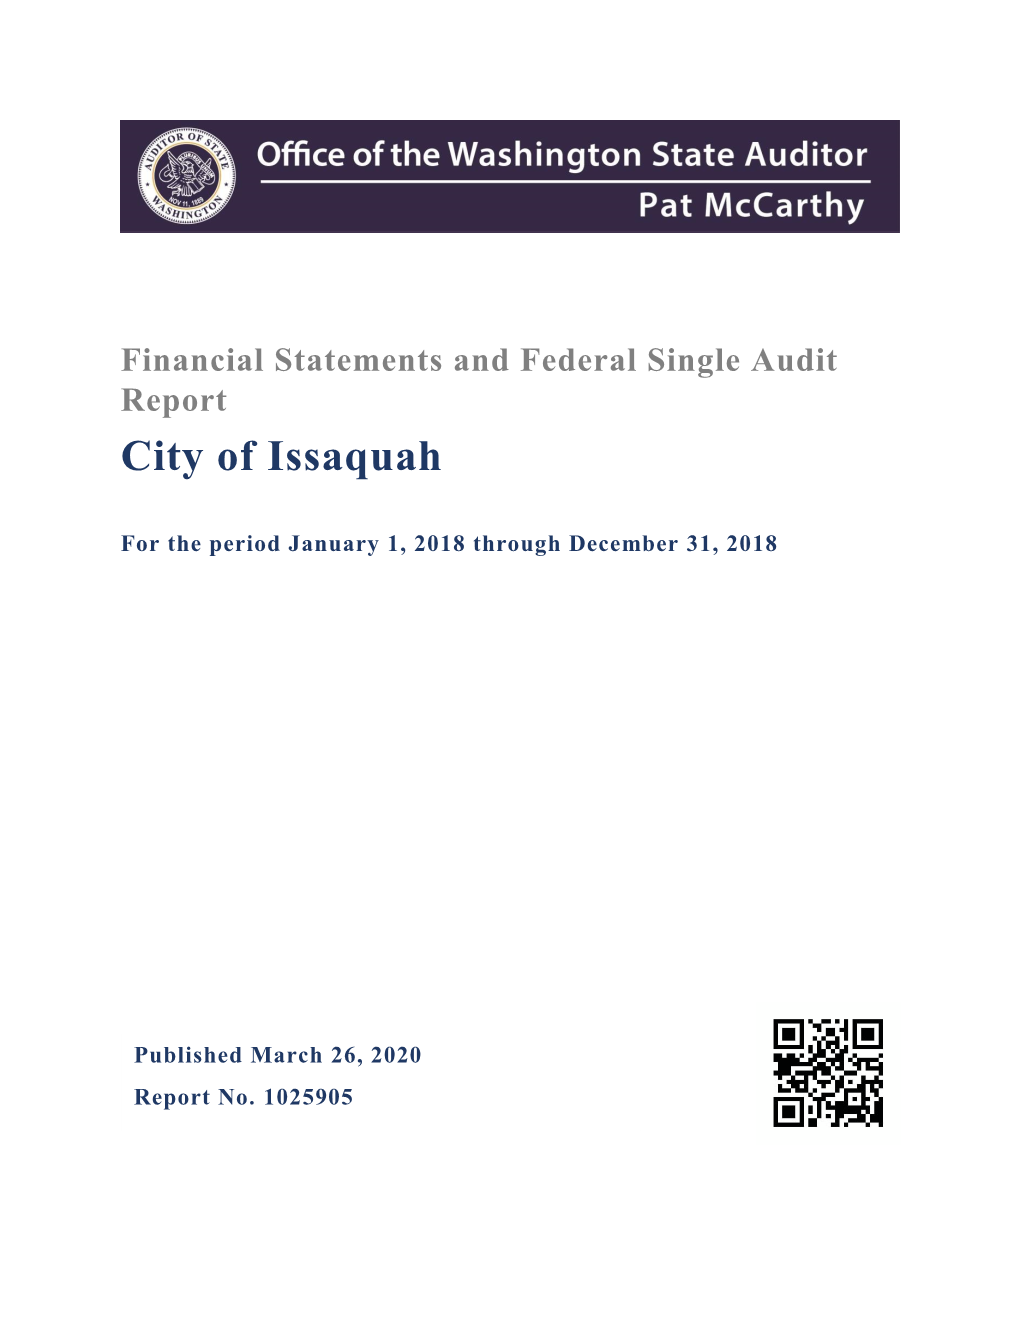 Financial Statements and Federal Single Audit Report City of Issaquah